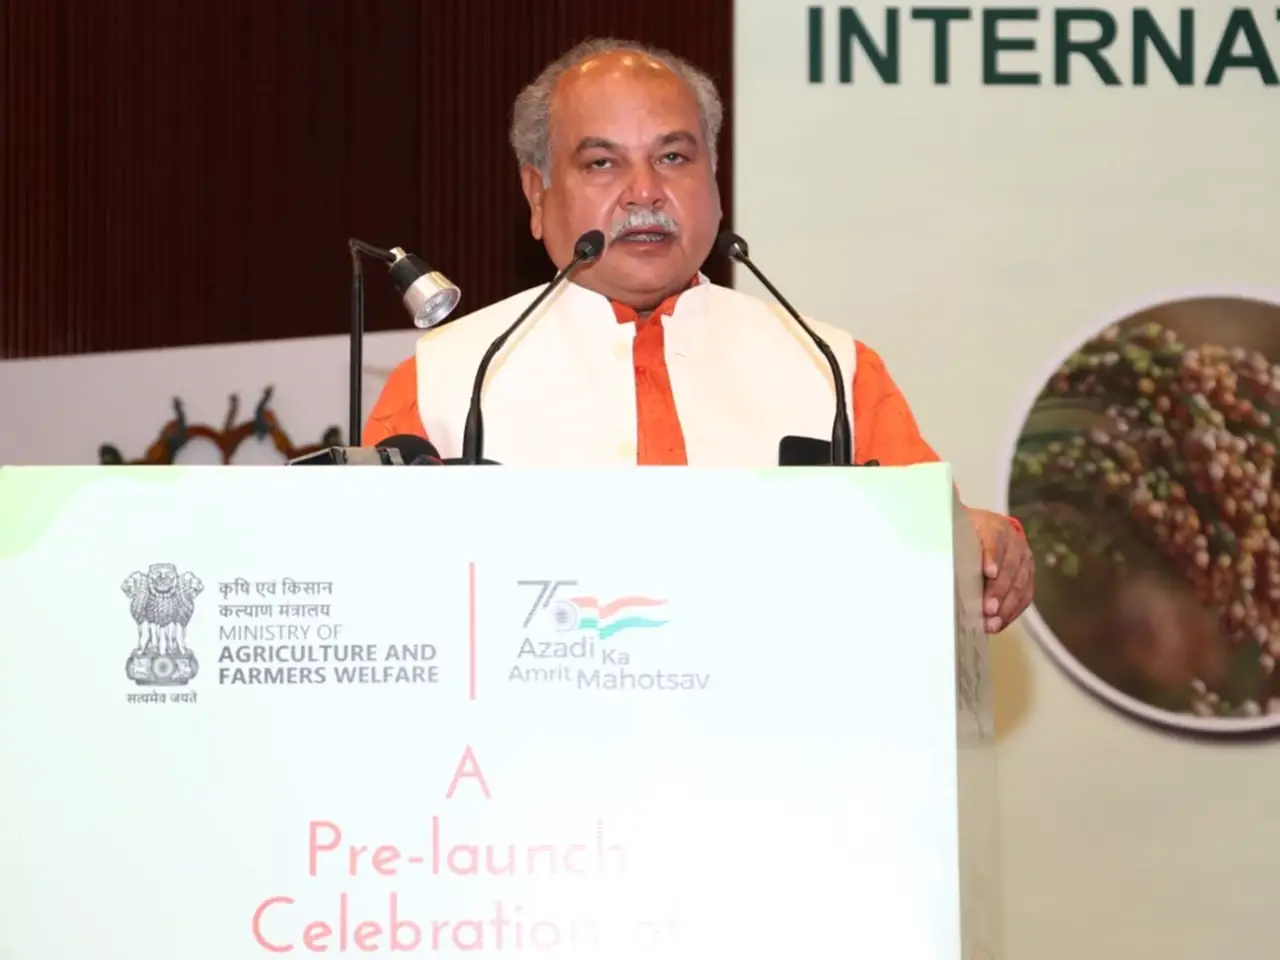 Narendra Singh Tomar, the Union Minister of Agriculture & Farmers Welfare